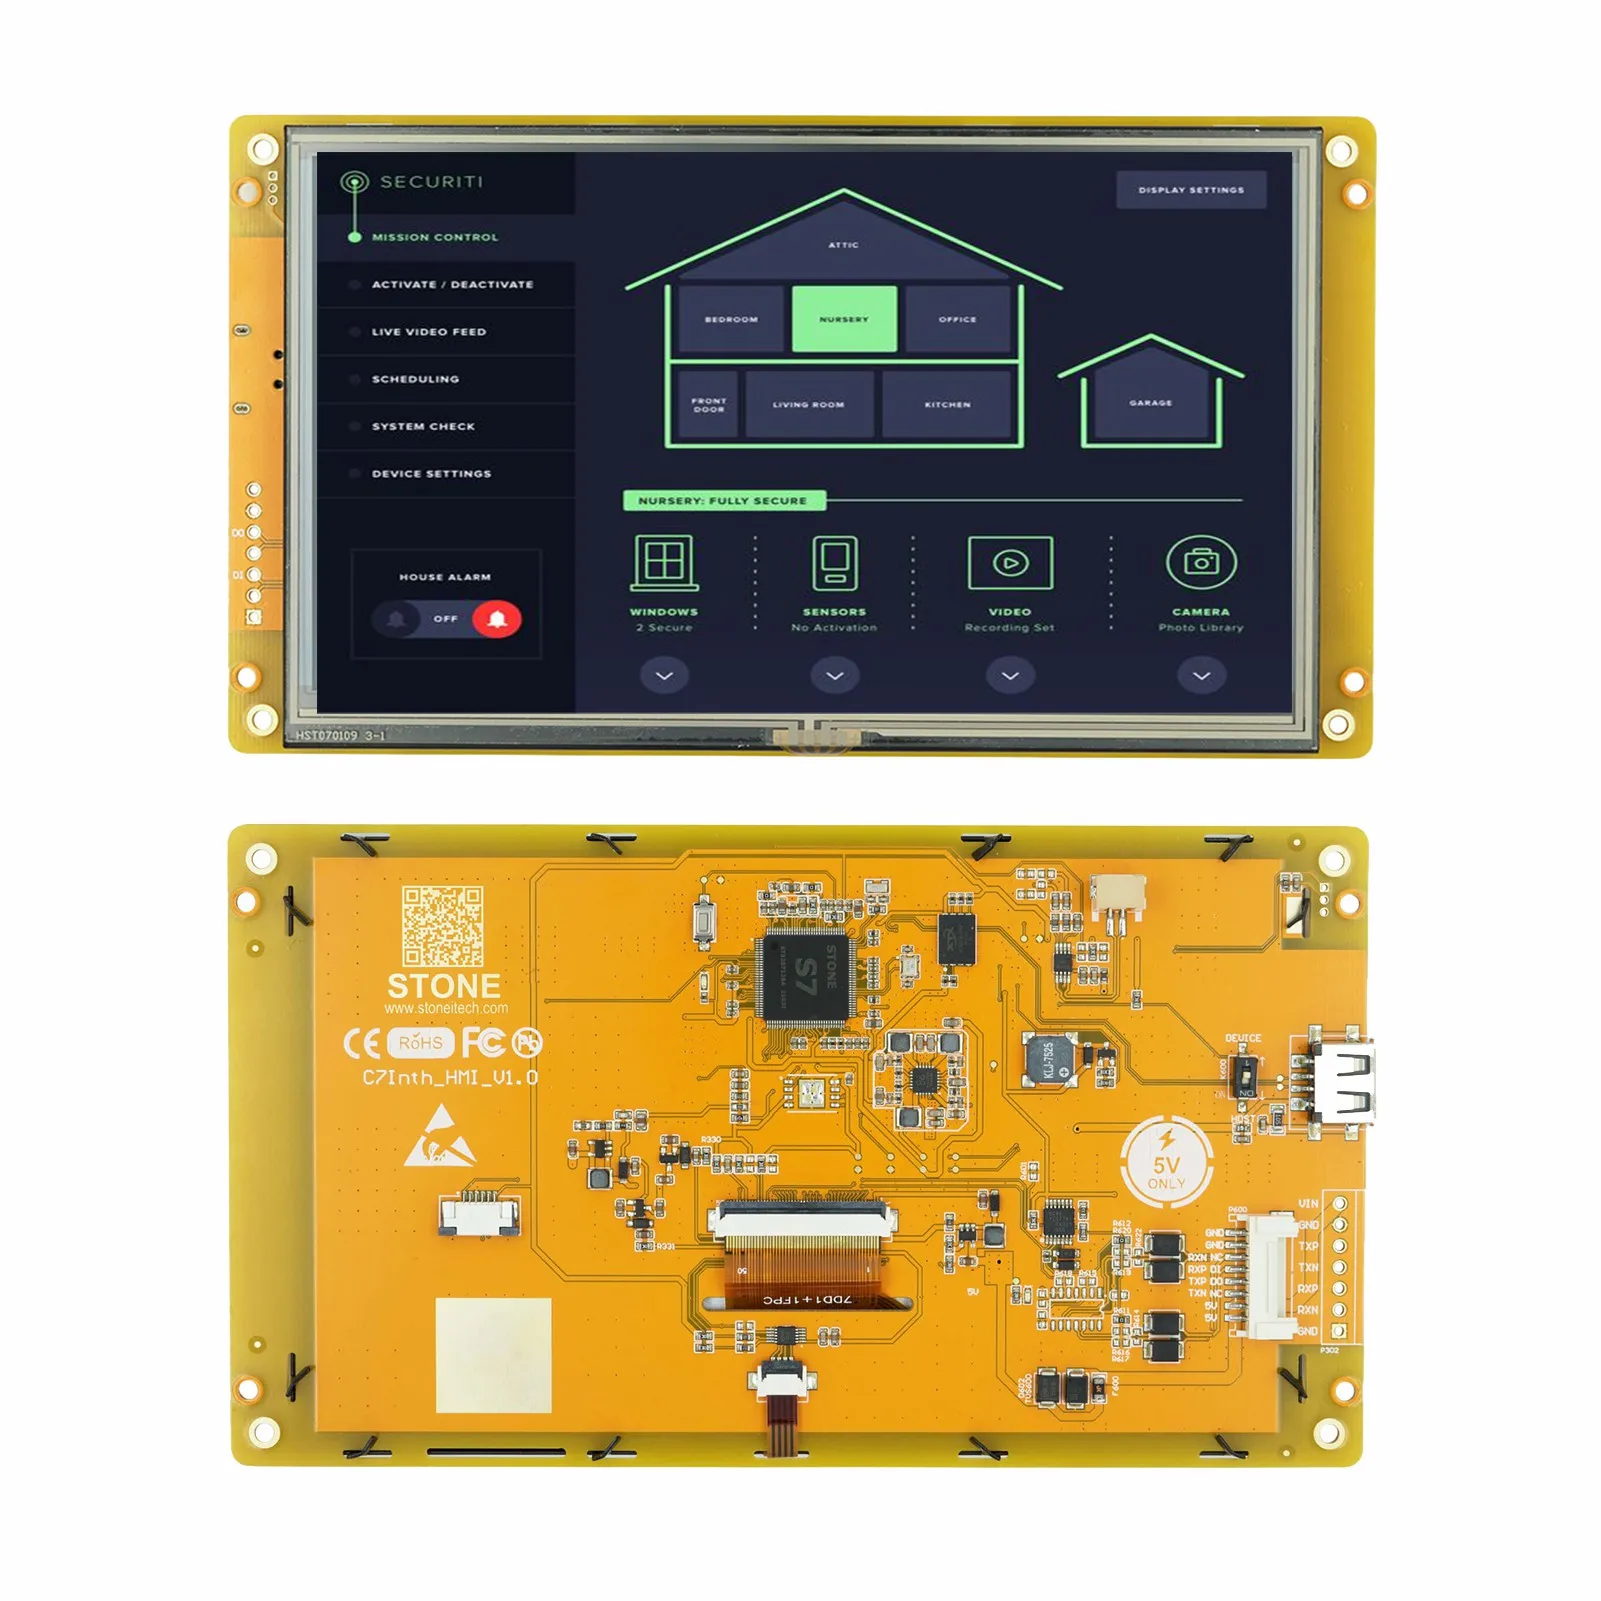 LCD Touch  7.0 Inch  Display Module with Embedded System With UART Port for Industrial Use